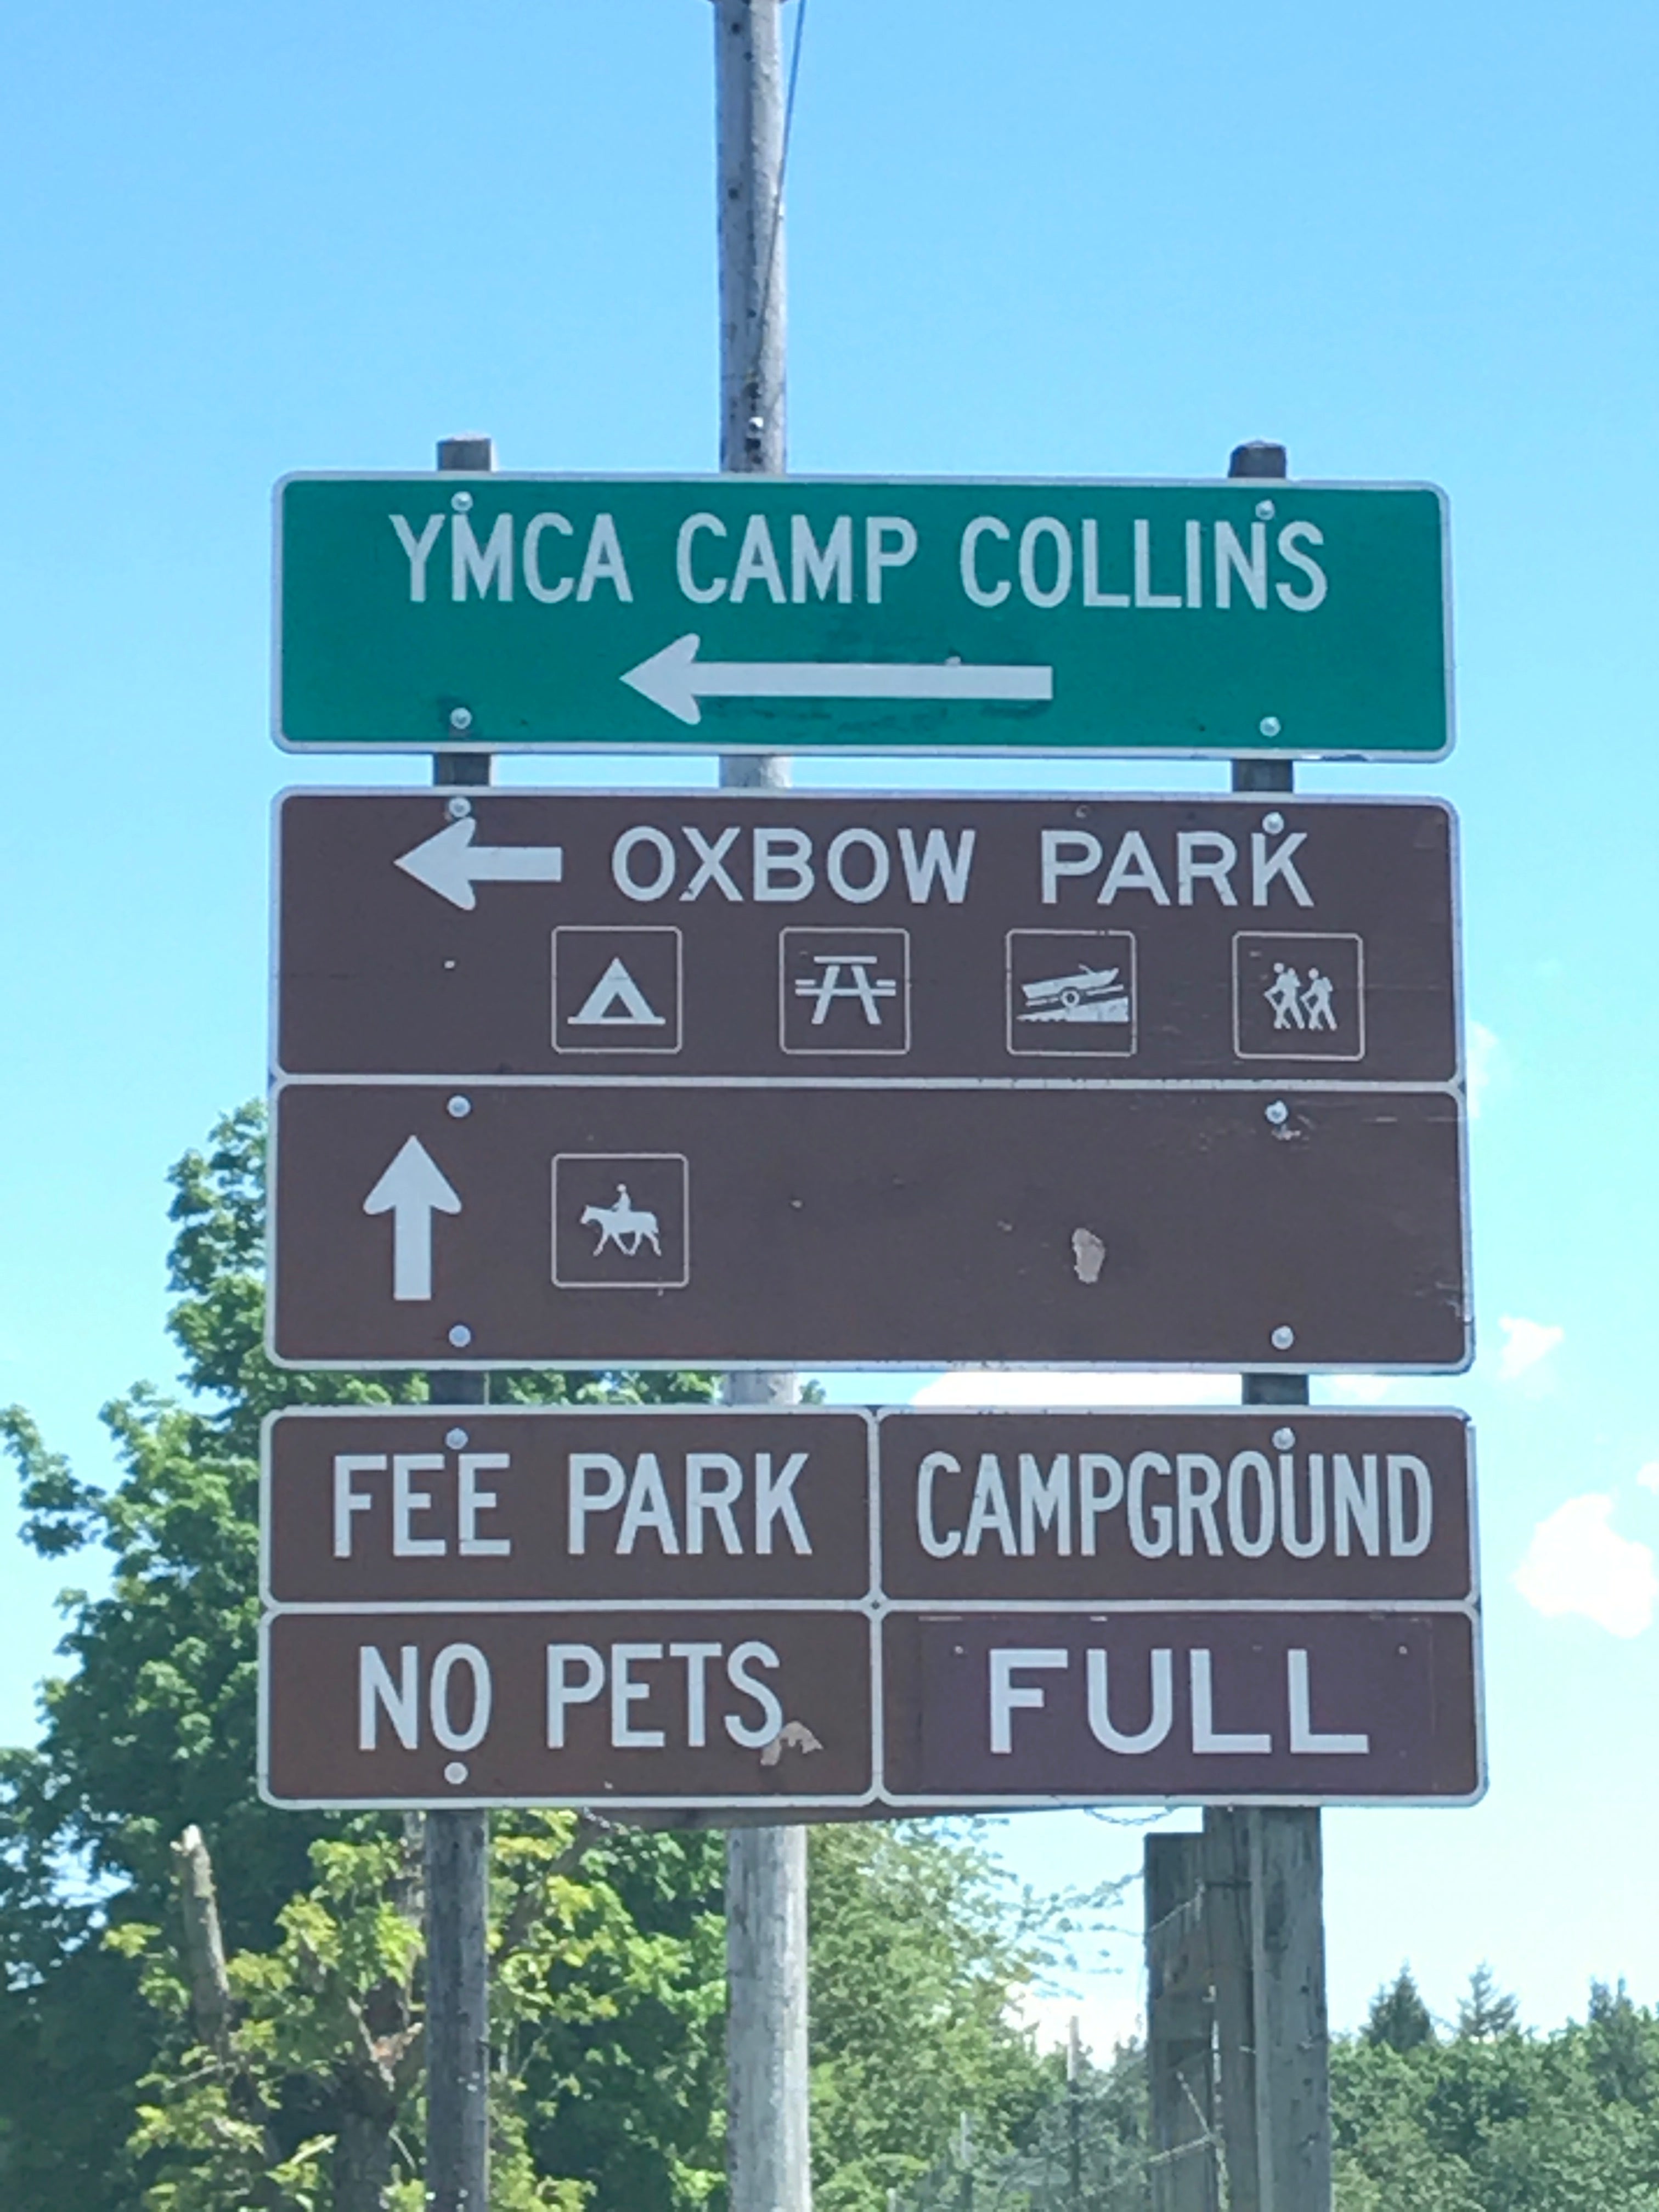 All the campground signs said full, but there was still space for walk up sites when I arrived at the site.